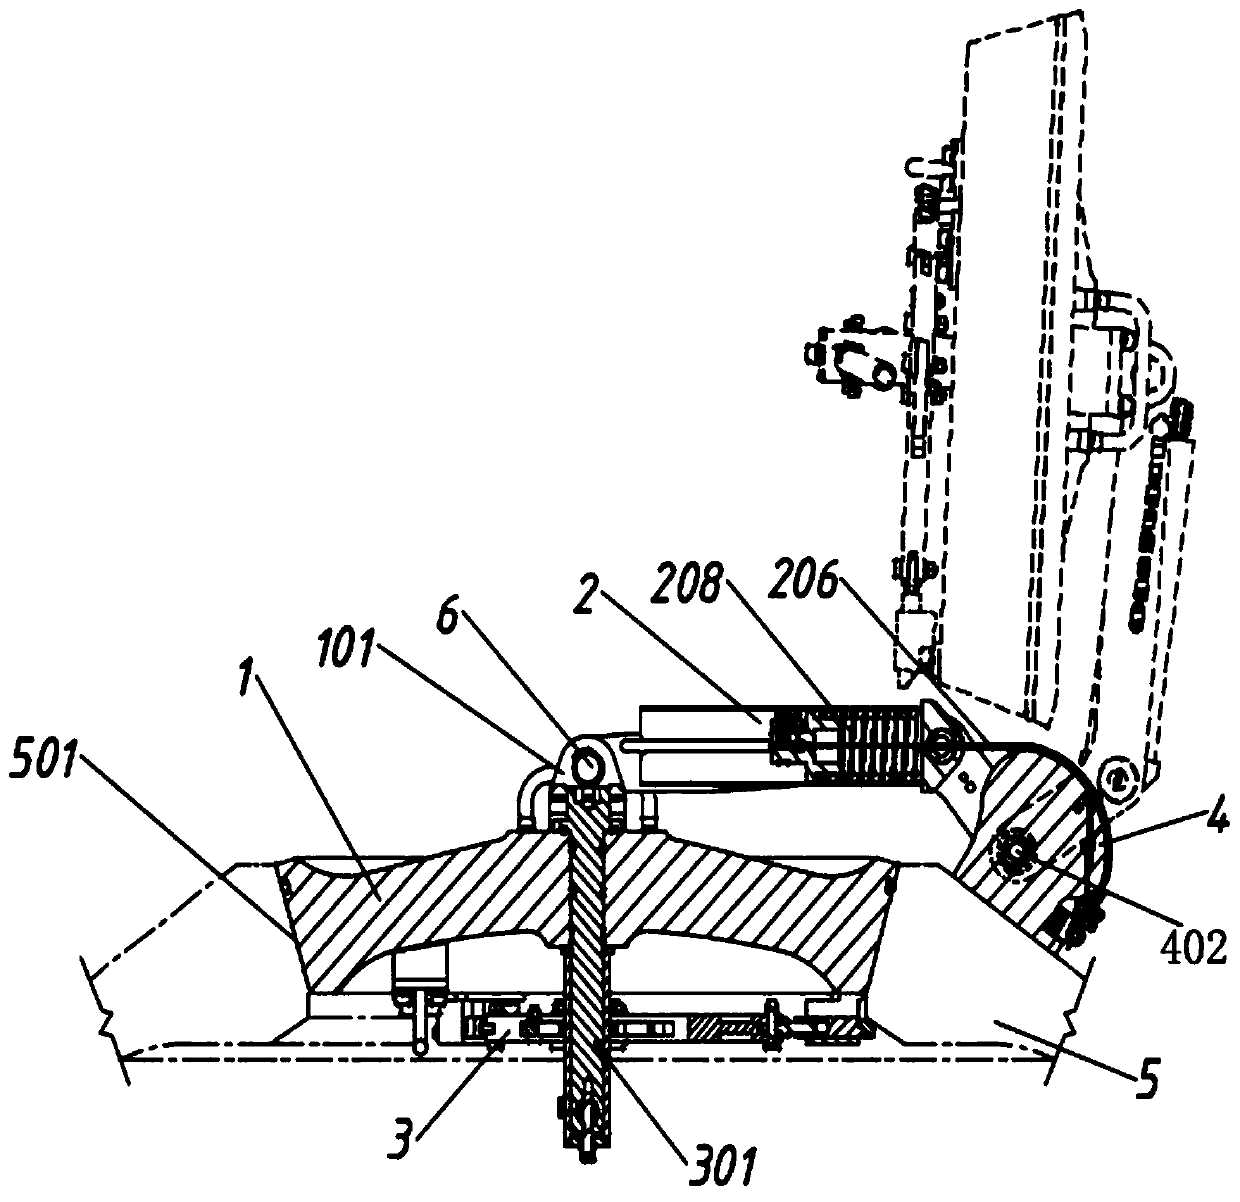 Hatch cover opening and closing mechanism of deep sea manned submersible